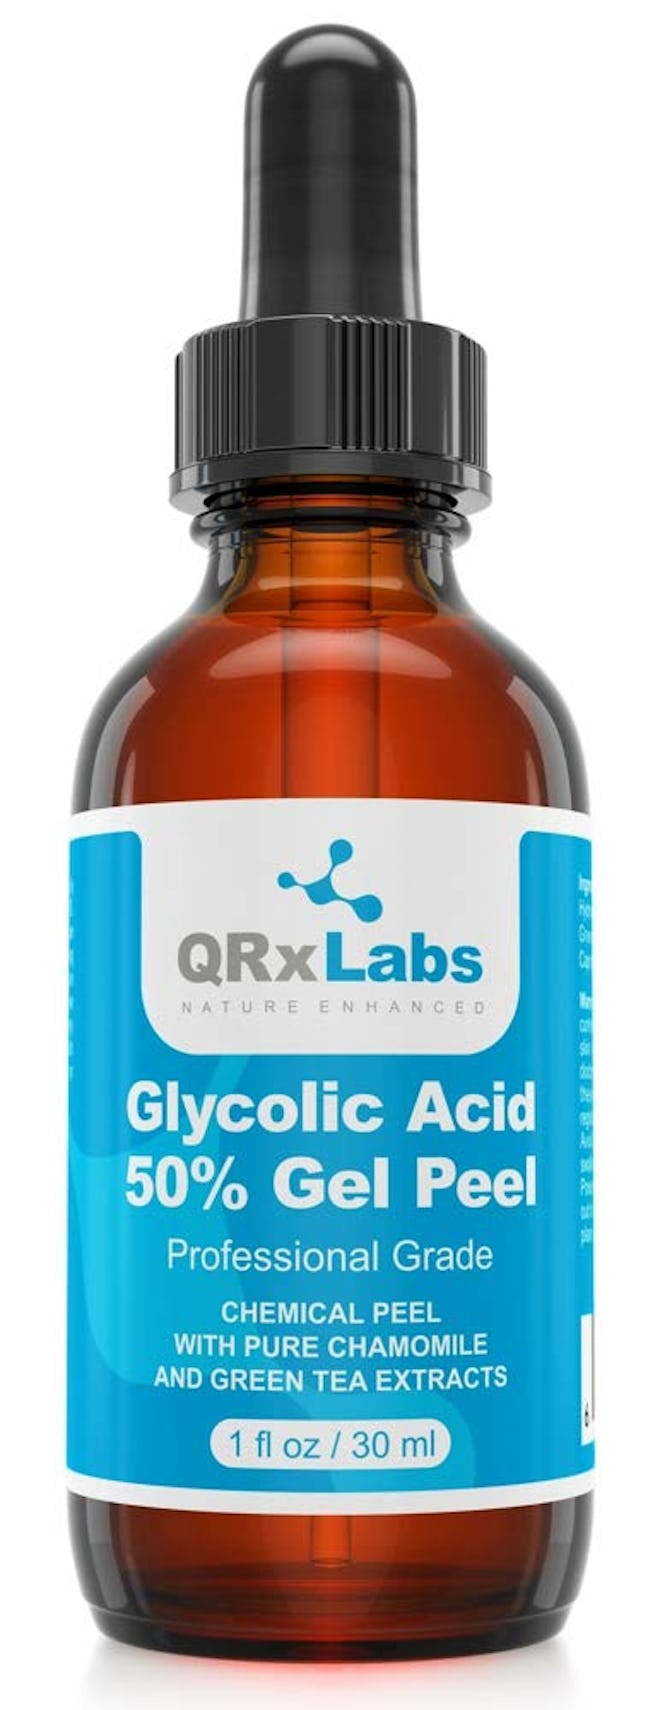 QRxLabs Glycolic Acid 50% Gel Peel with Chamomile and Green Tea Extracts